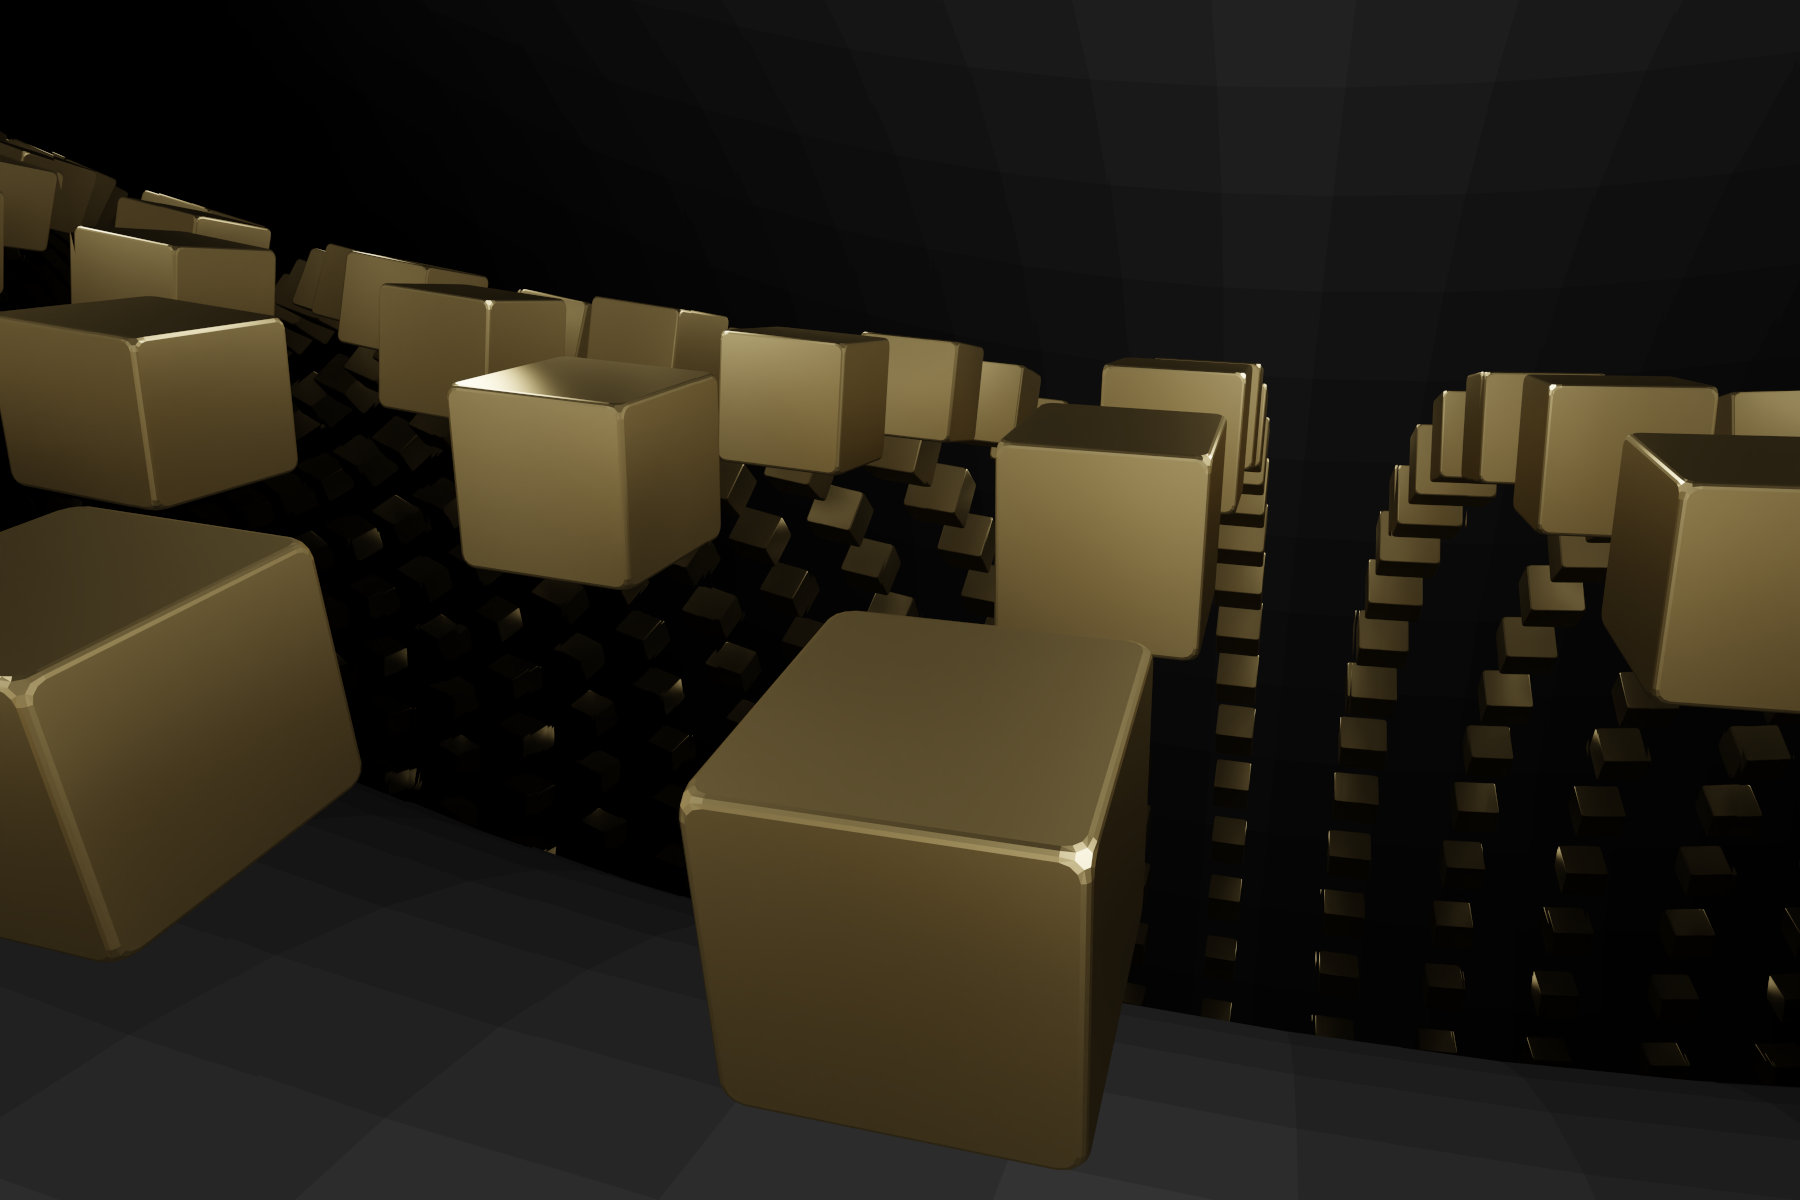 Virtual abstract scenery, Abstract digital art, Raytracing, Computer-rendered image, 2022. A golden cube appears in many reflected images on a curved grey surface.